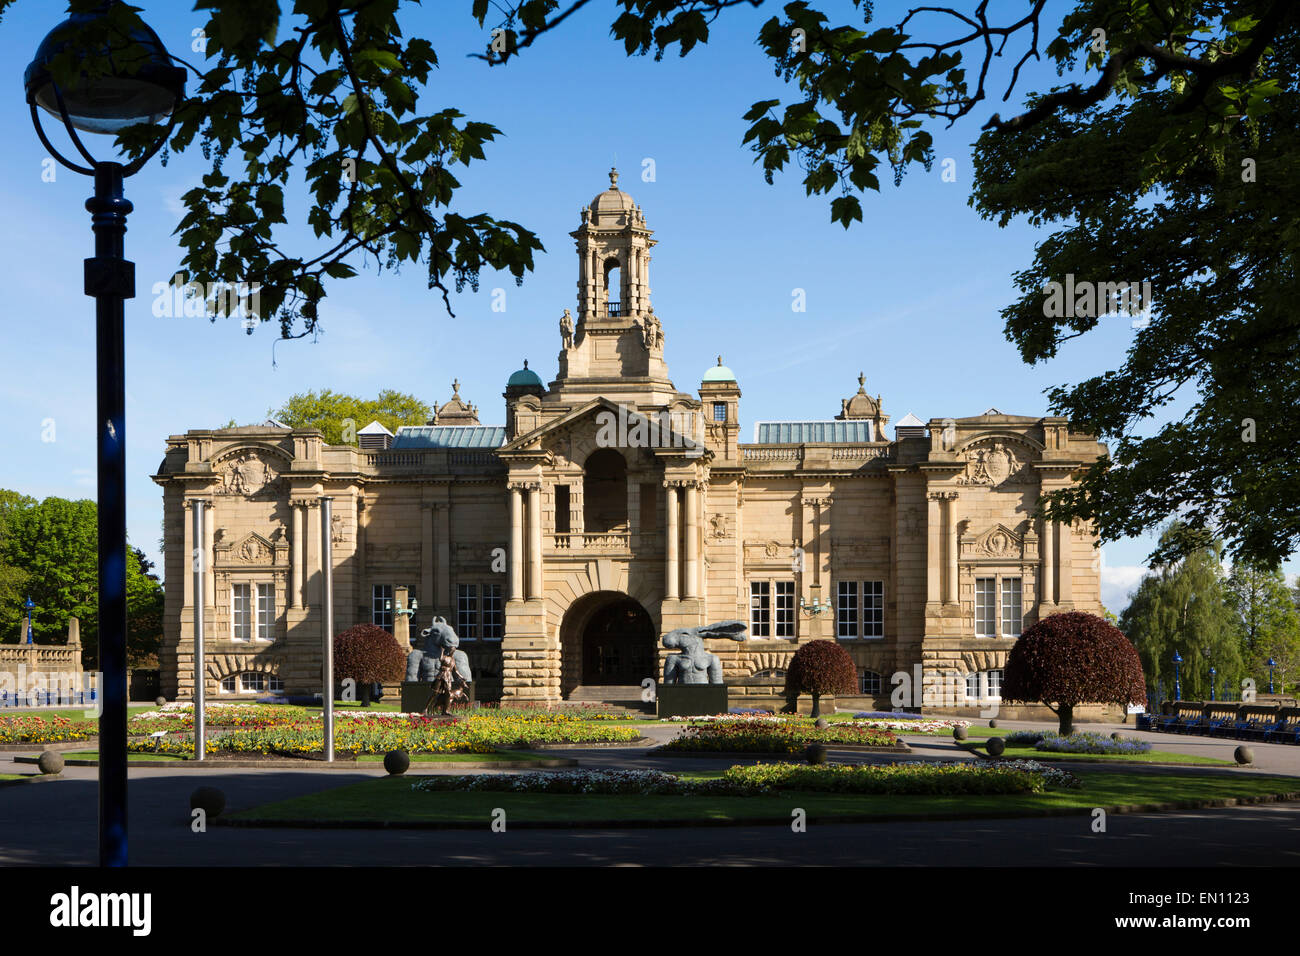 Royaume-uni, Angleterre, dans le Yorkshire, Bradford Lister Park, Carwtright Hall Civic Art Gallery Banque D'Images